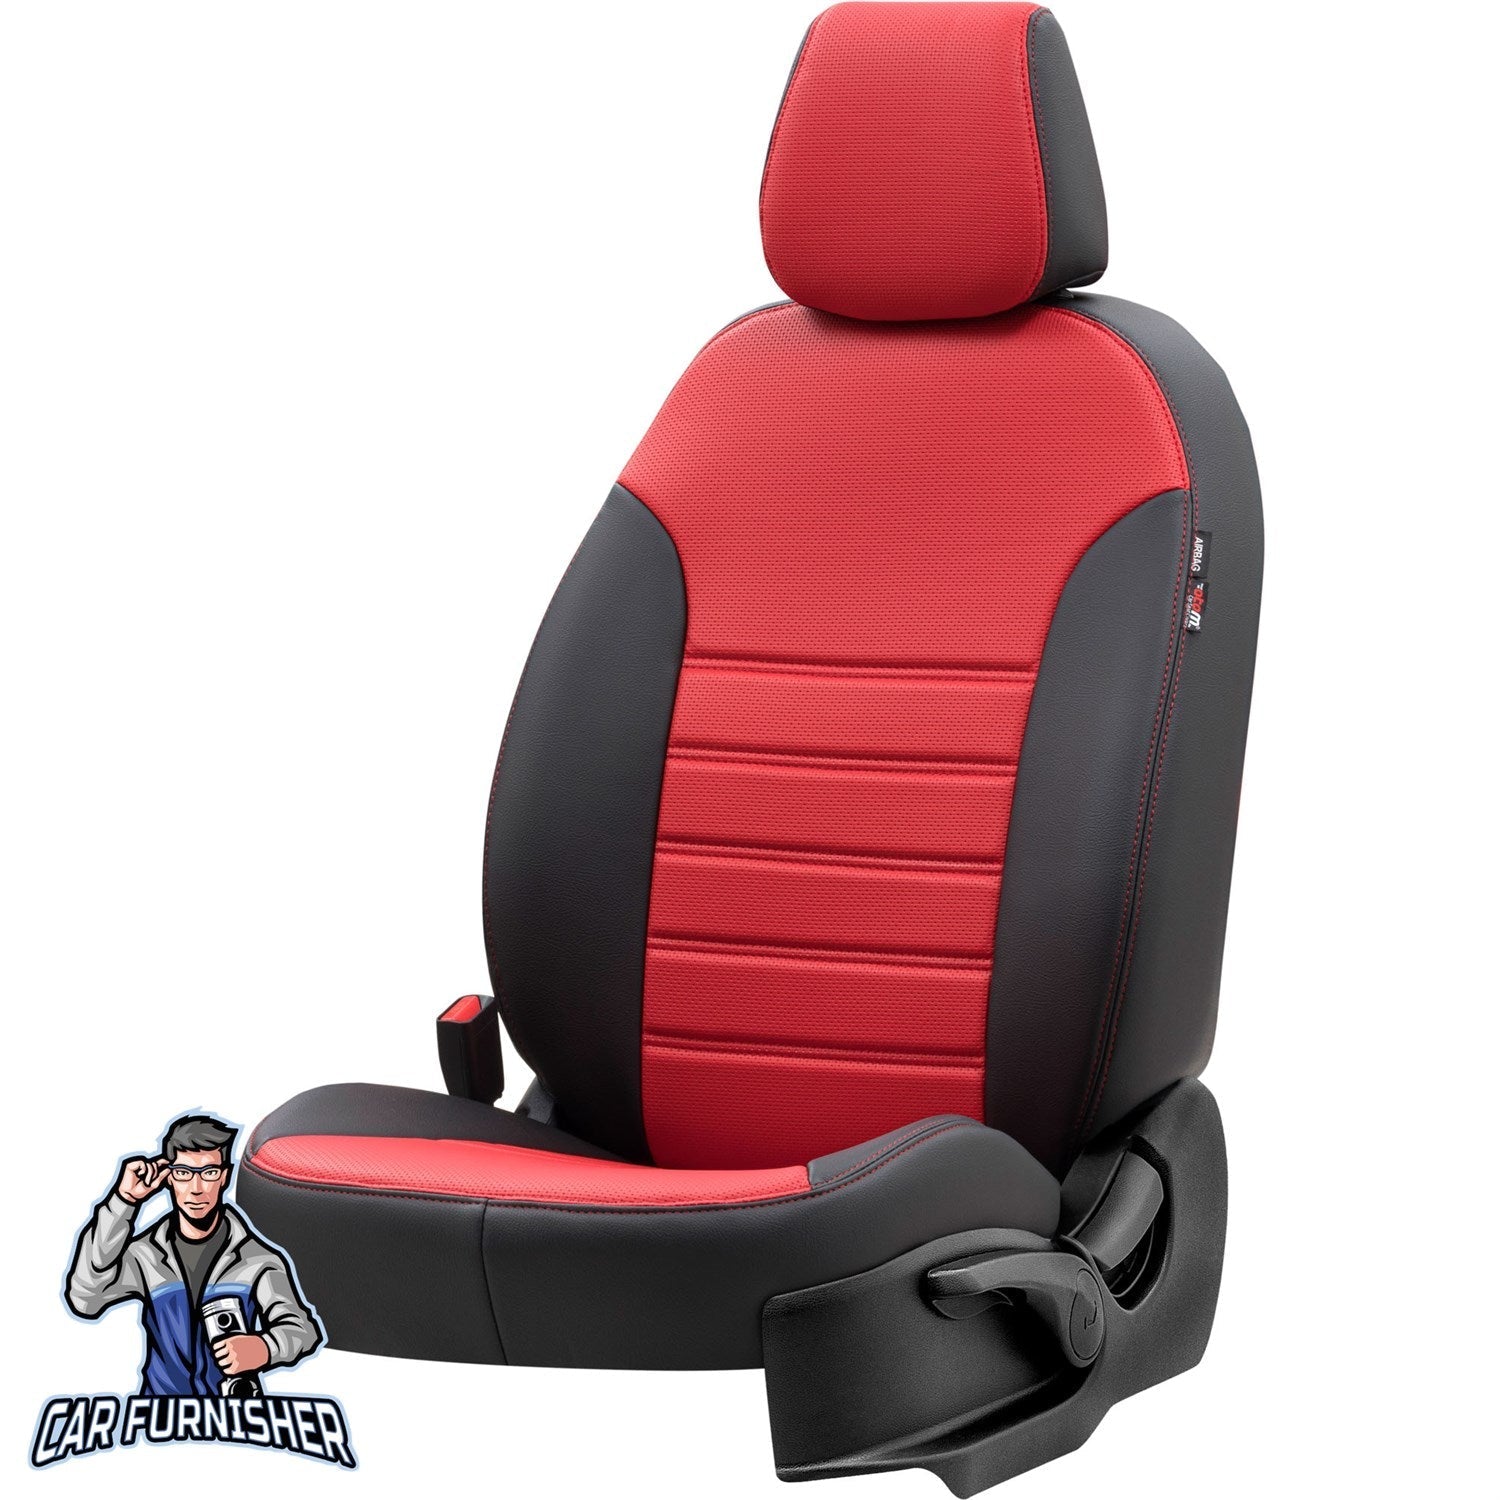 Renault Master Seat Covers New York Leather Design Red Leather